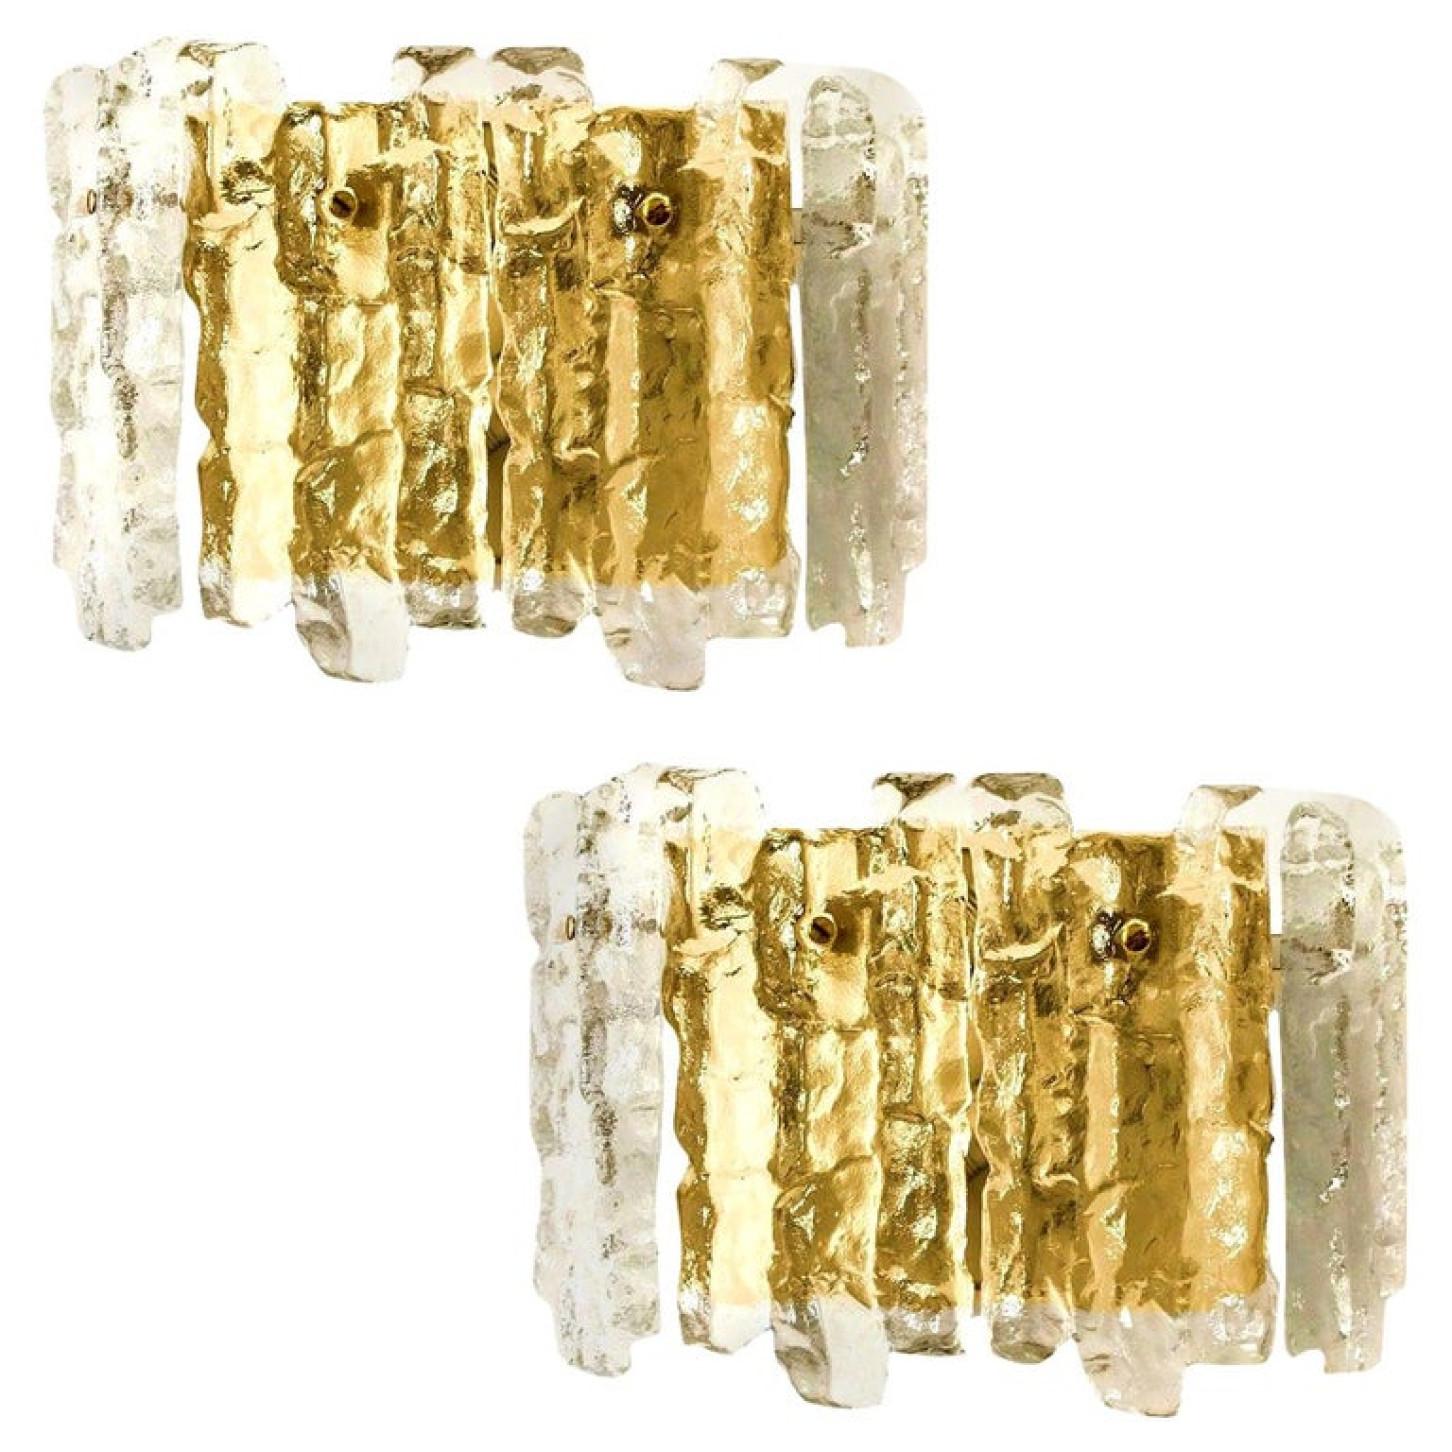 Pair of elegant modern high-end large brass wall lights or sconces, manufactured by J.T. Kalmar, Austria in the 1970s. Lovely design, executed to a very high standard. Each wall light has four solid ice glass sheets dangling on it. Clean lines to